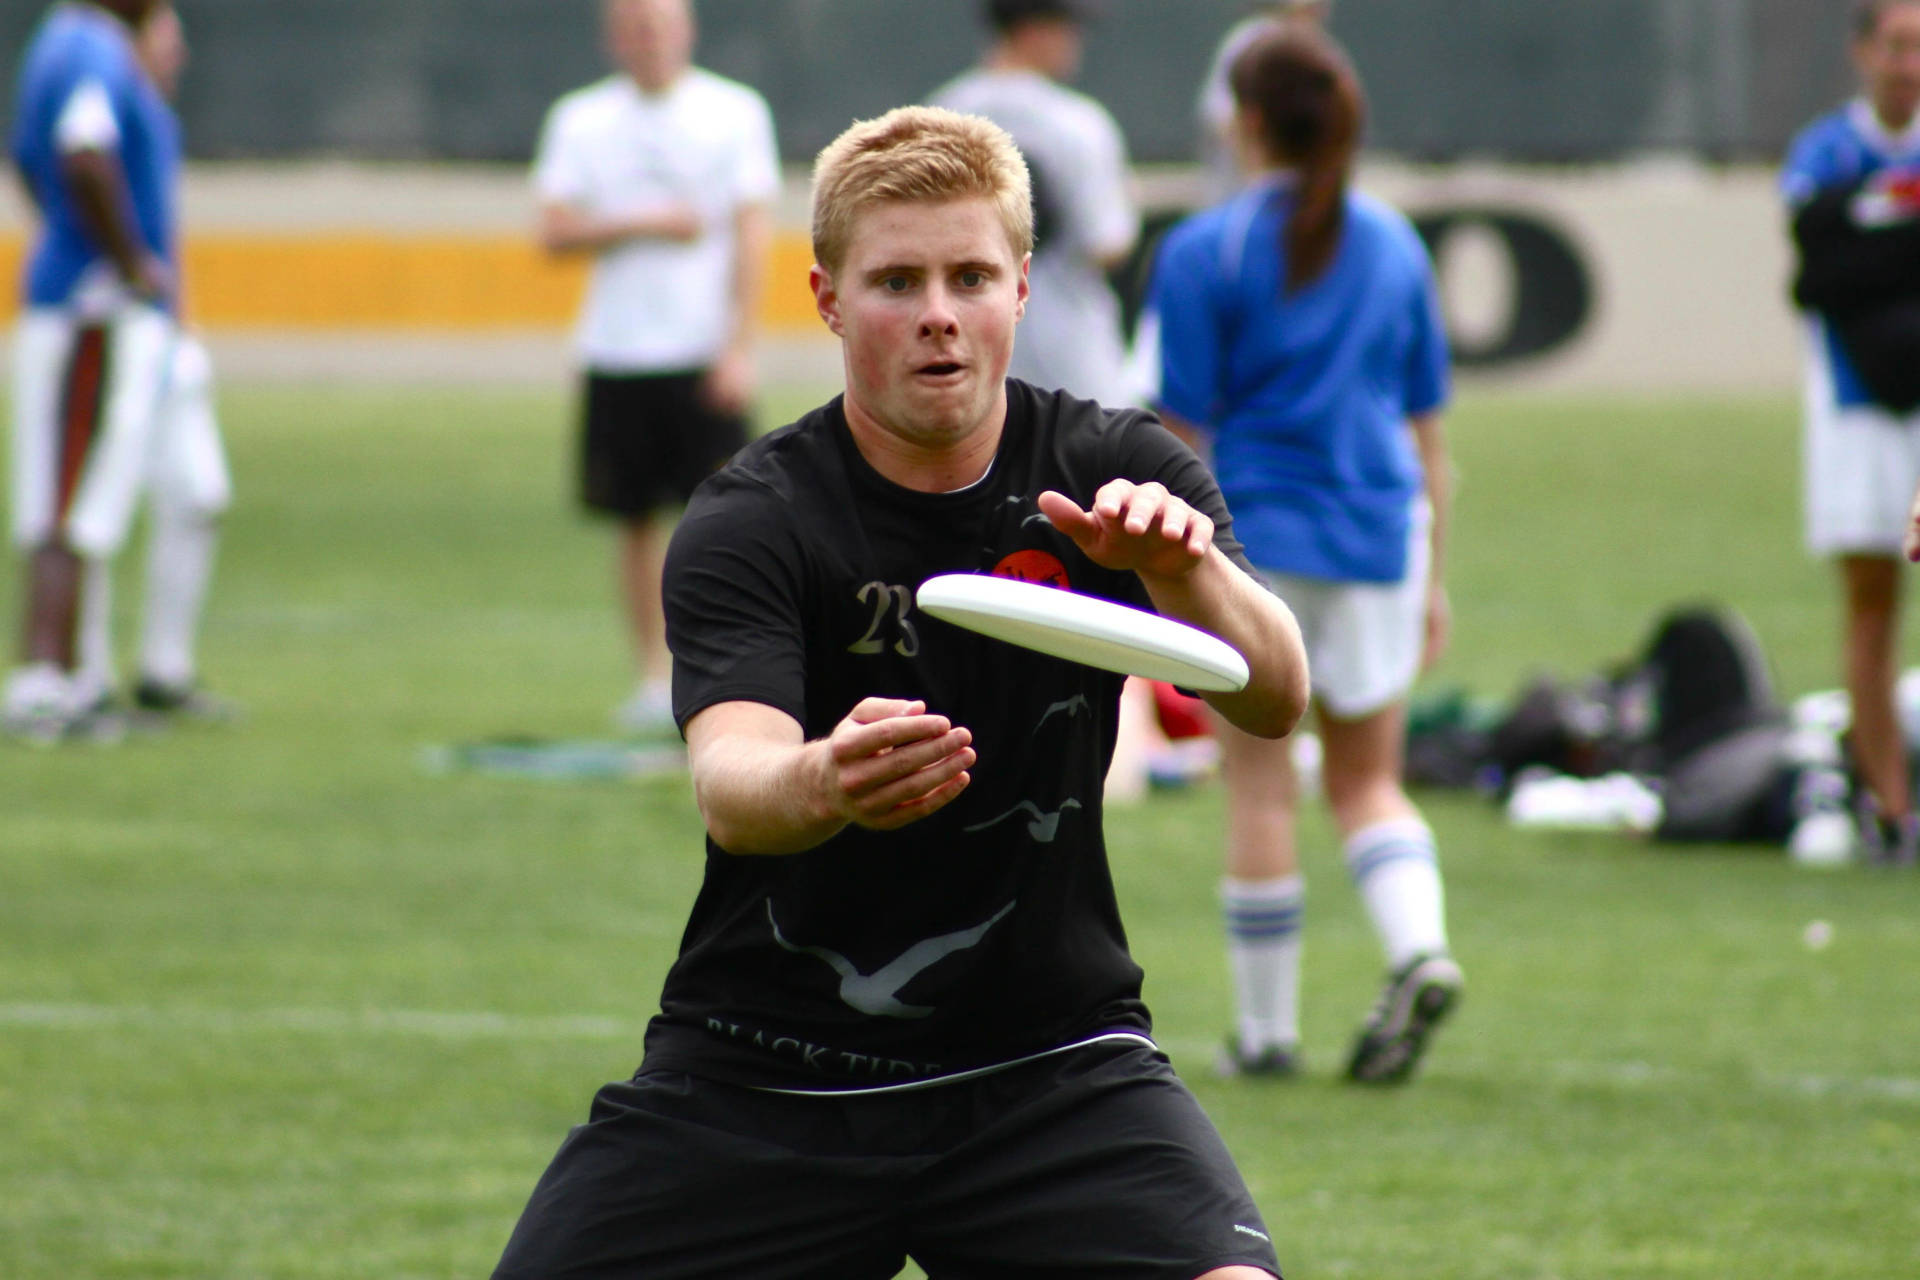 Ultimate Frisbee Player in Dynamic Action Wallpaper